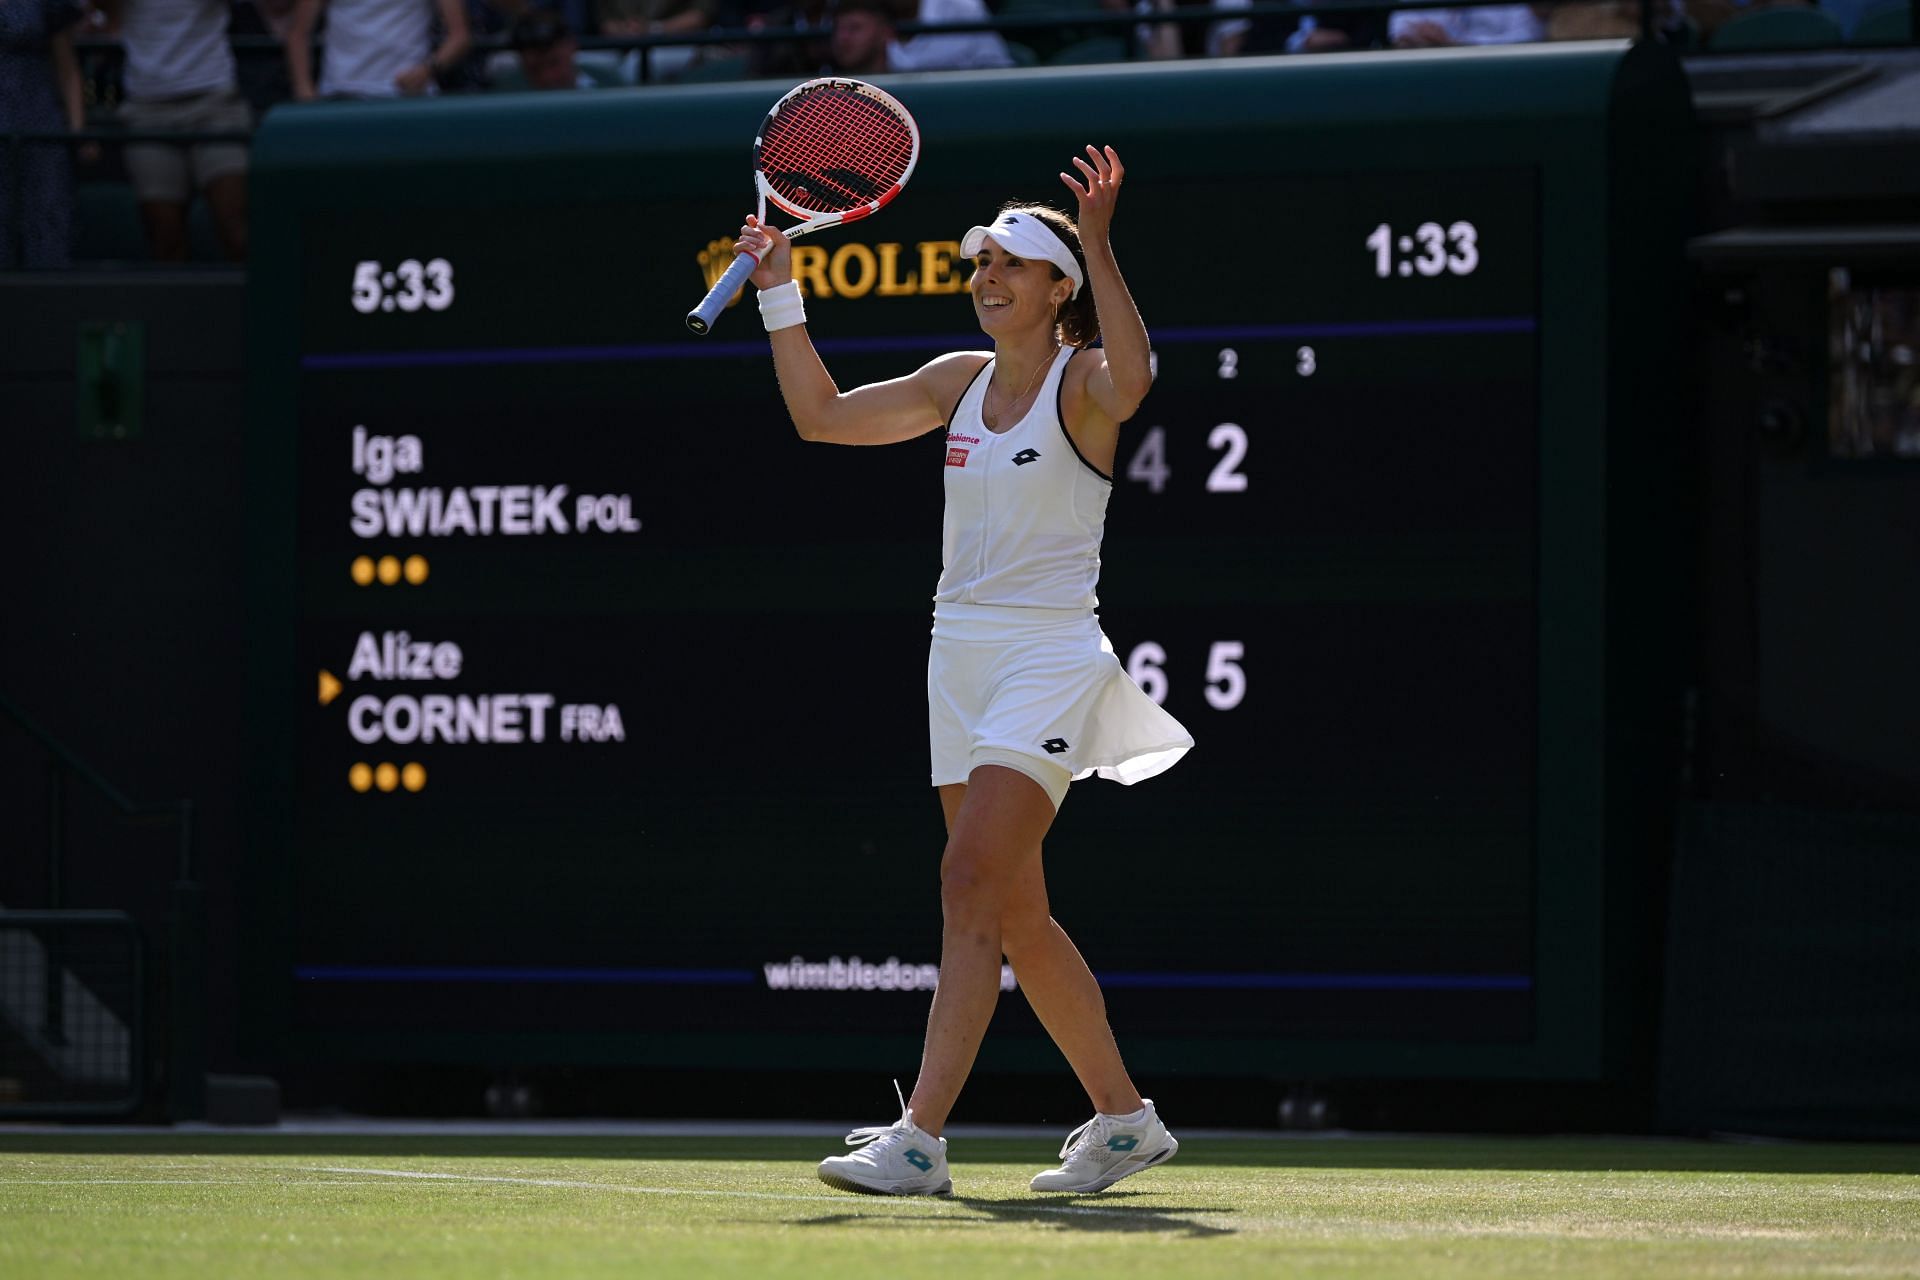 Alize Cornet scripted one of the biggest upsets in Wimbledon